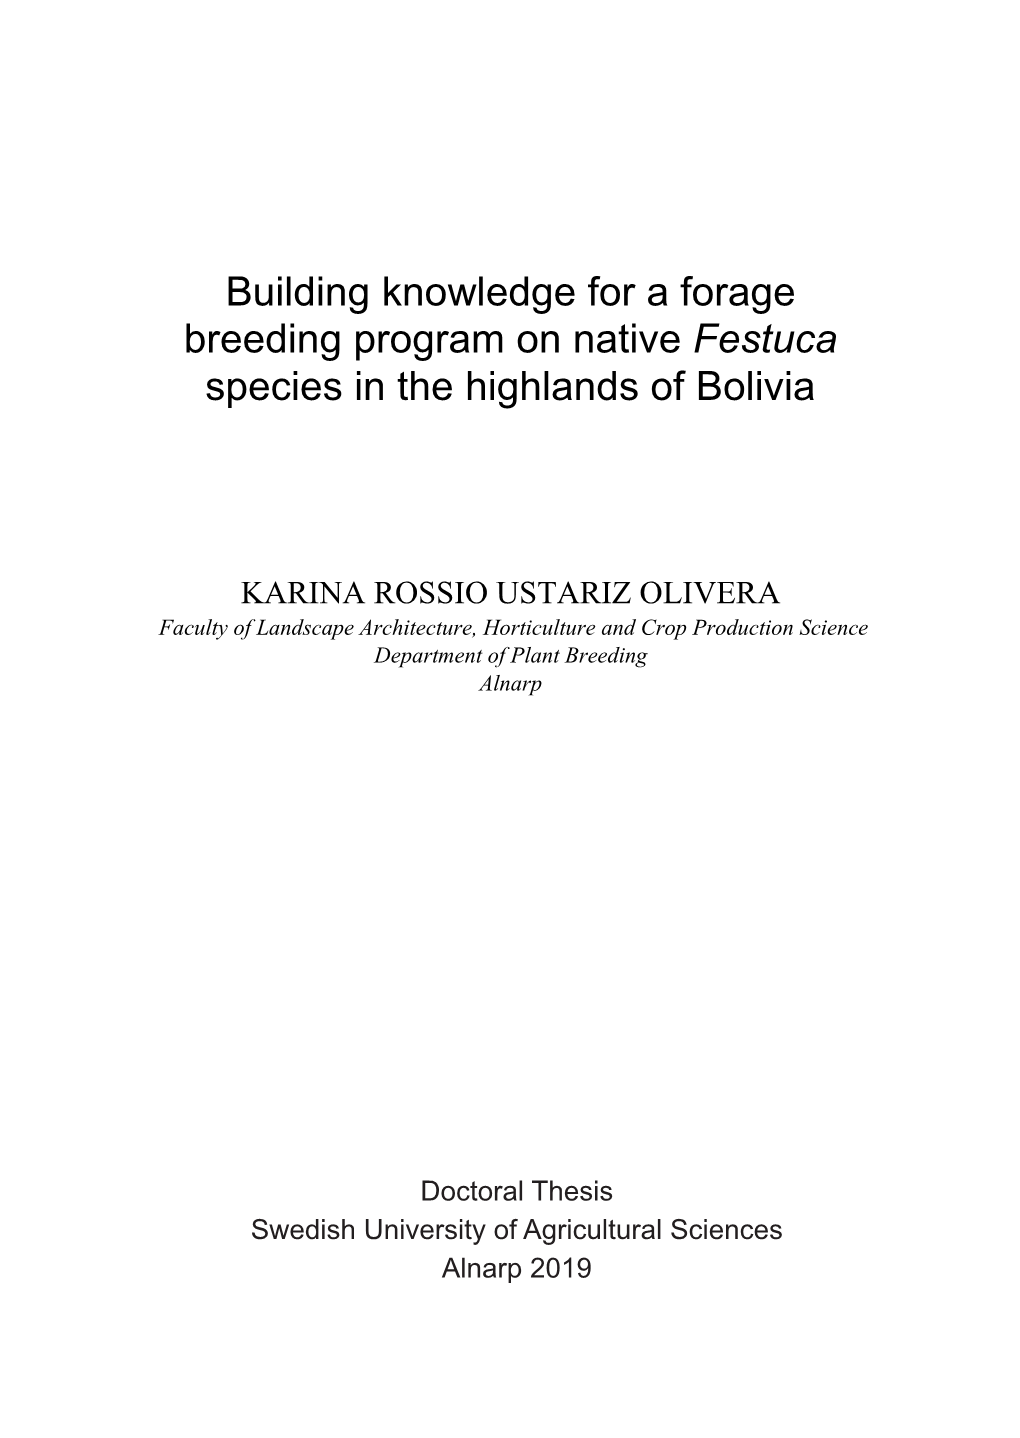 Building Knowledge for a Forage Breeding Program on Native Festuca Species in the Highlands of Bolivia